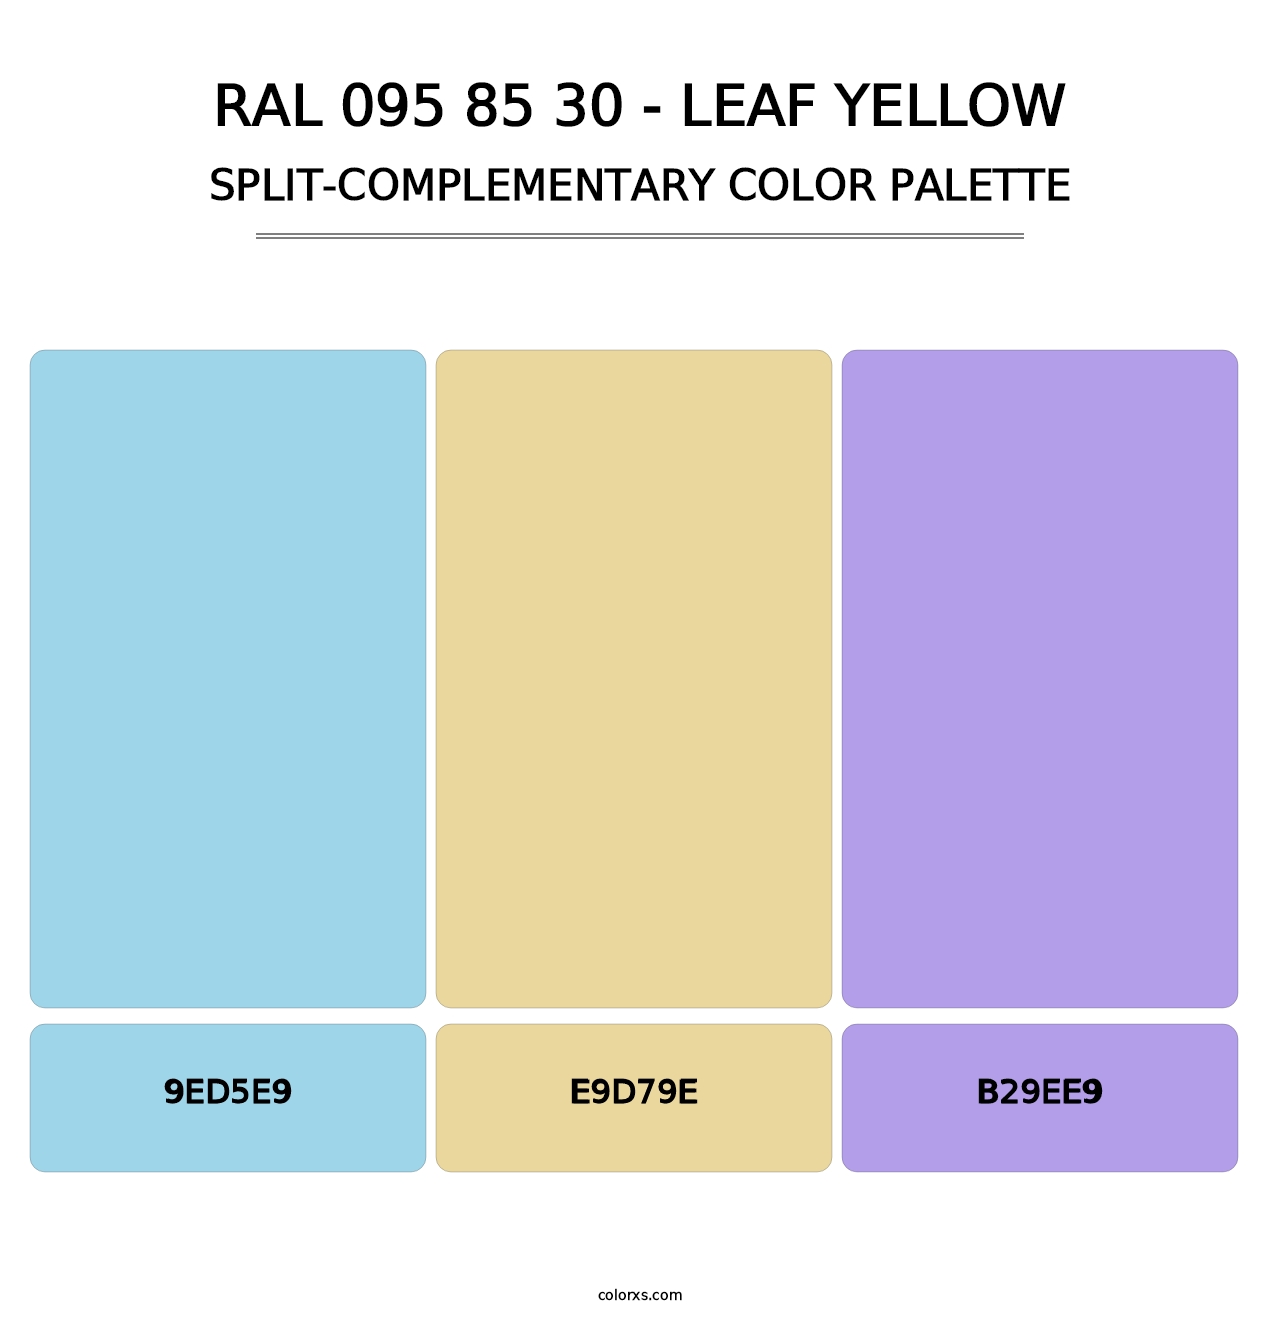 RAL 095 85 30 - Leaf Yellow - Split-Complementary Color Palette